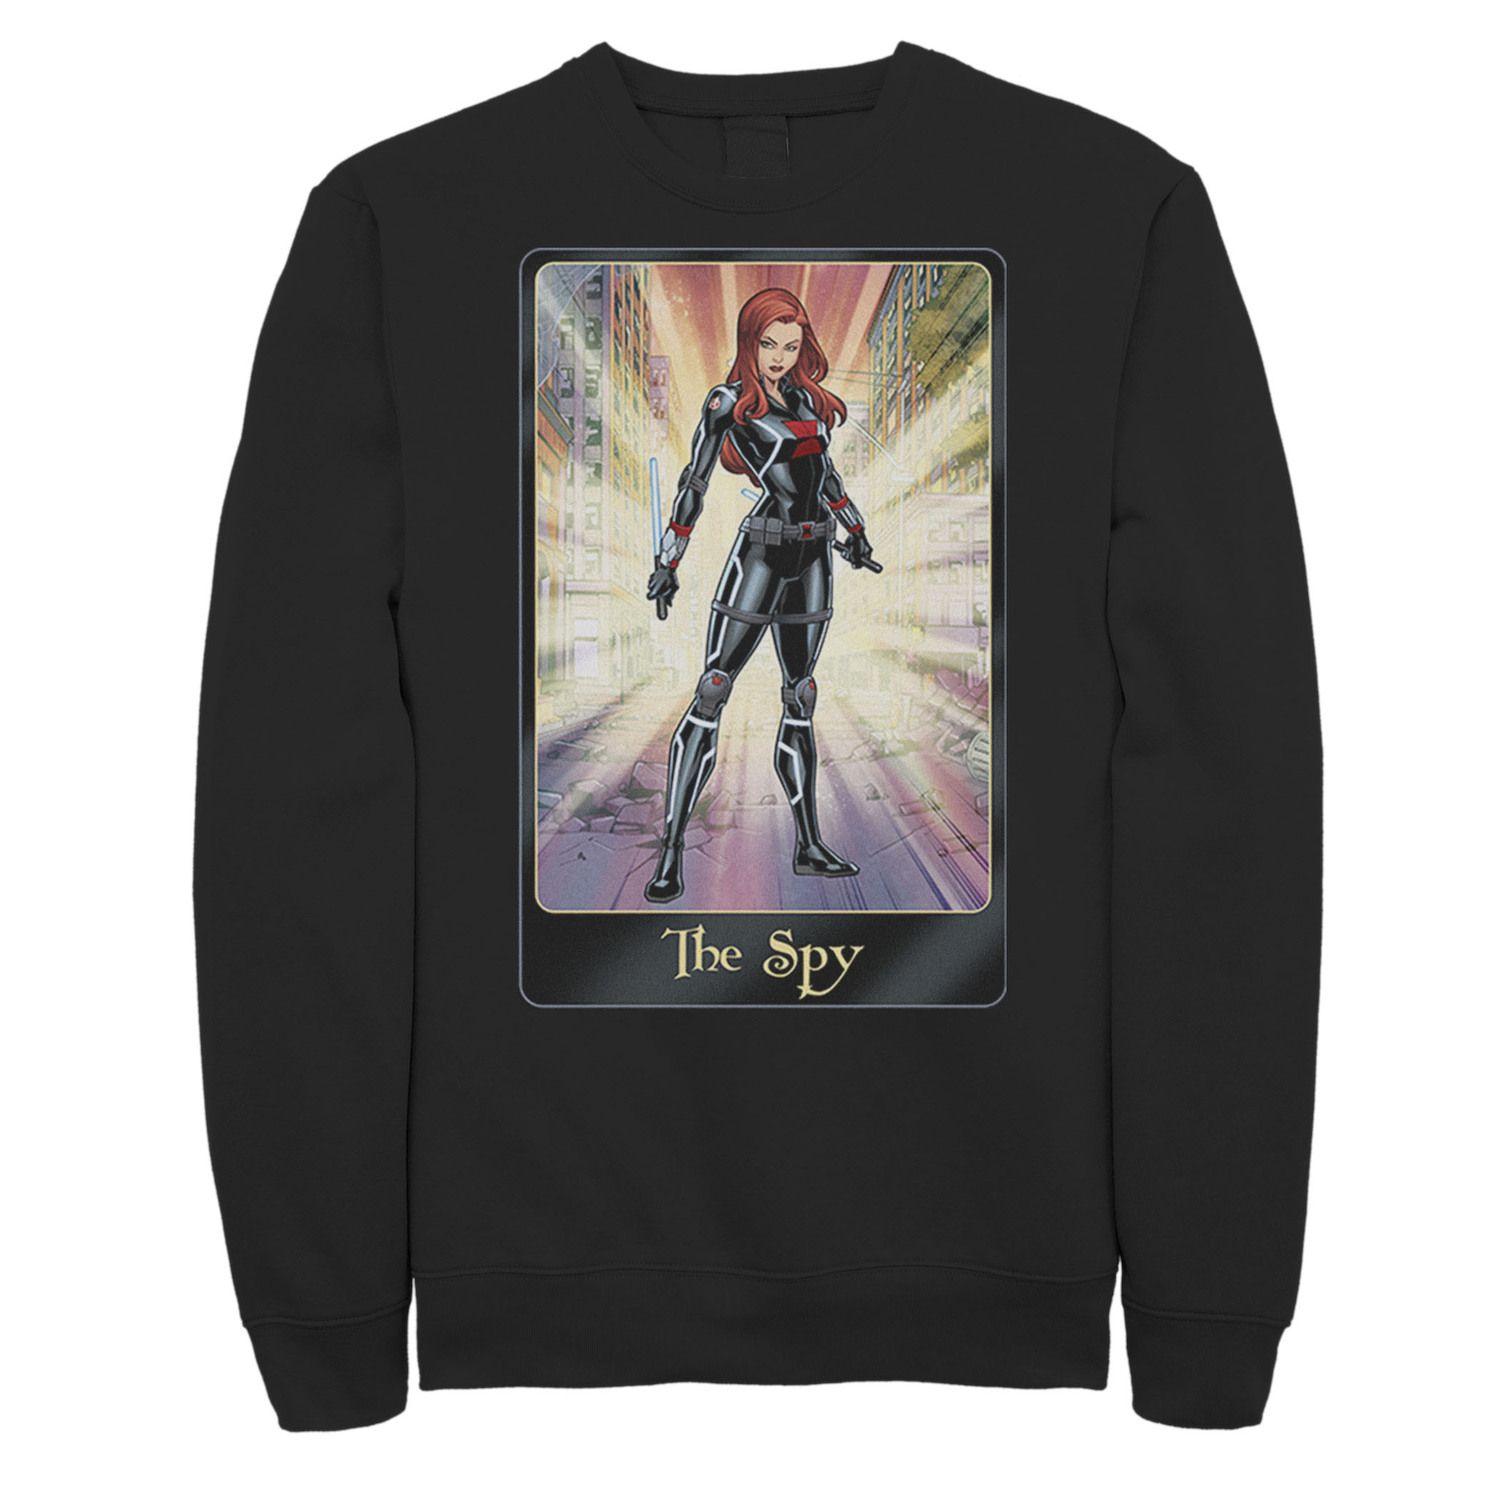 This is an offer made on the Request: SPY X FAMILY Merch